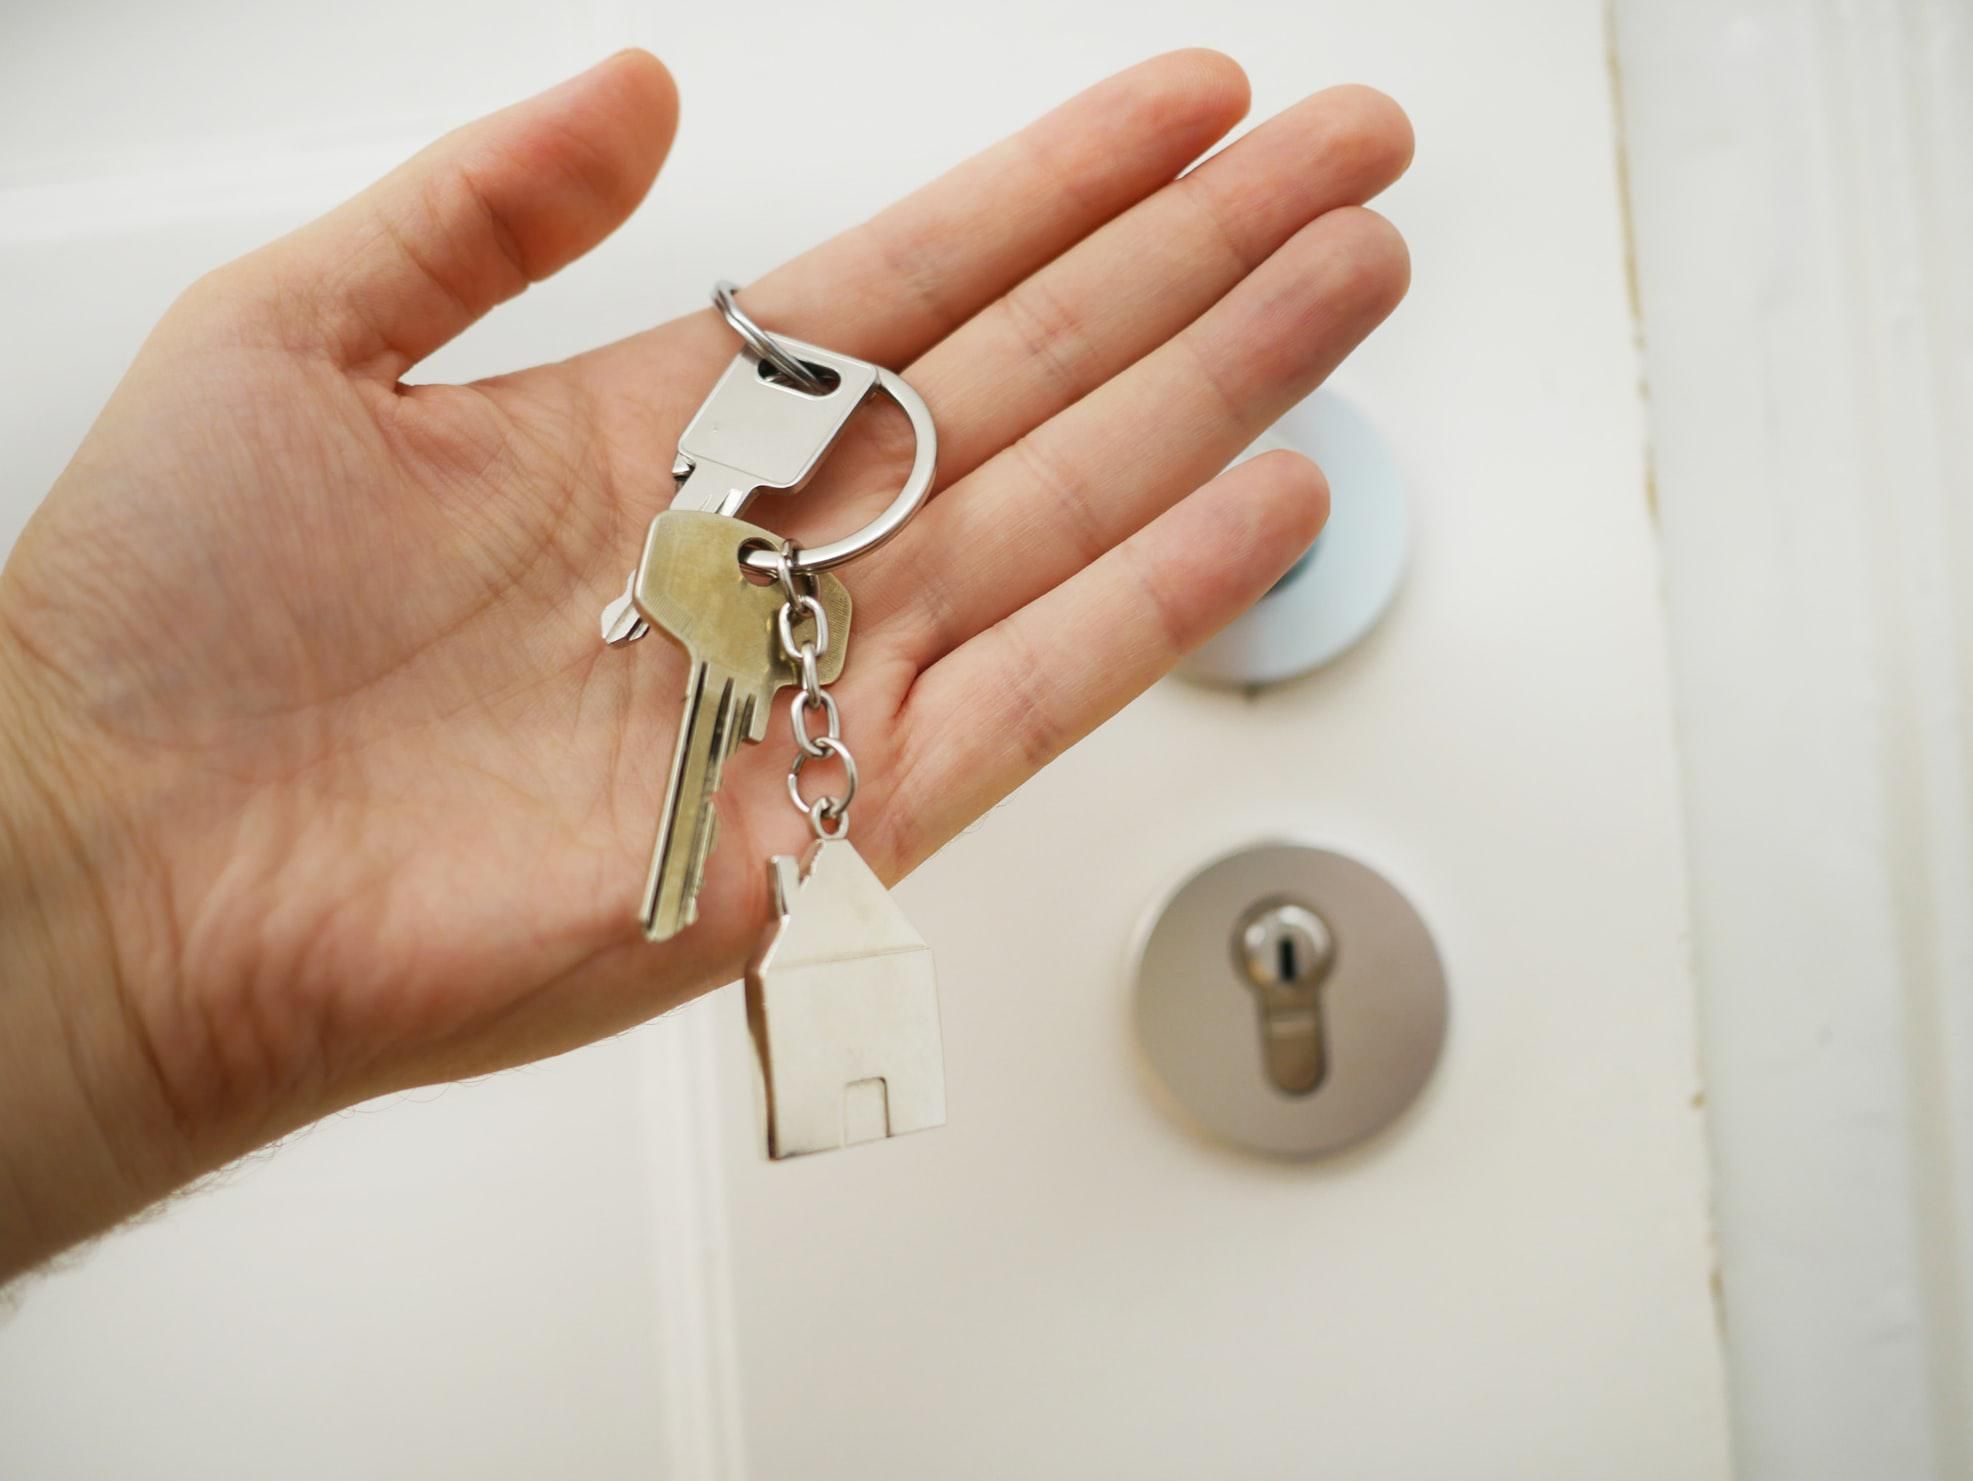 Ways You'll Need to Take Responsibility for Your Rental Properties